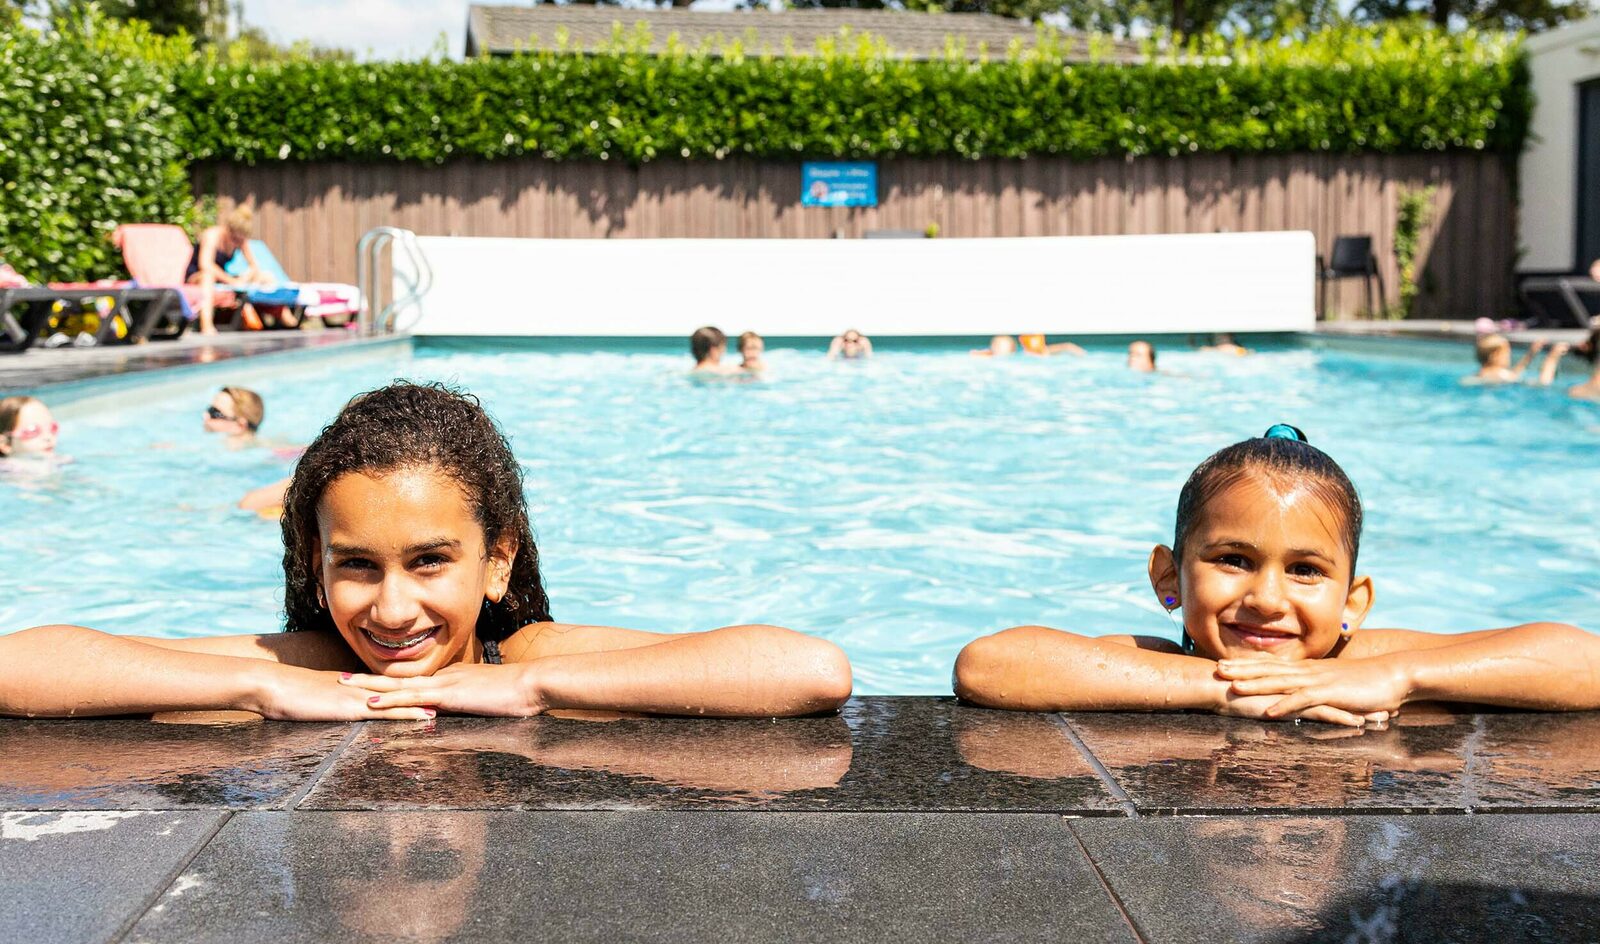 Discover our holiday parks with an outside pool as well